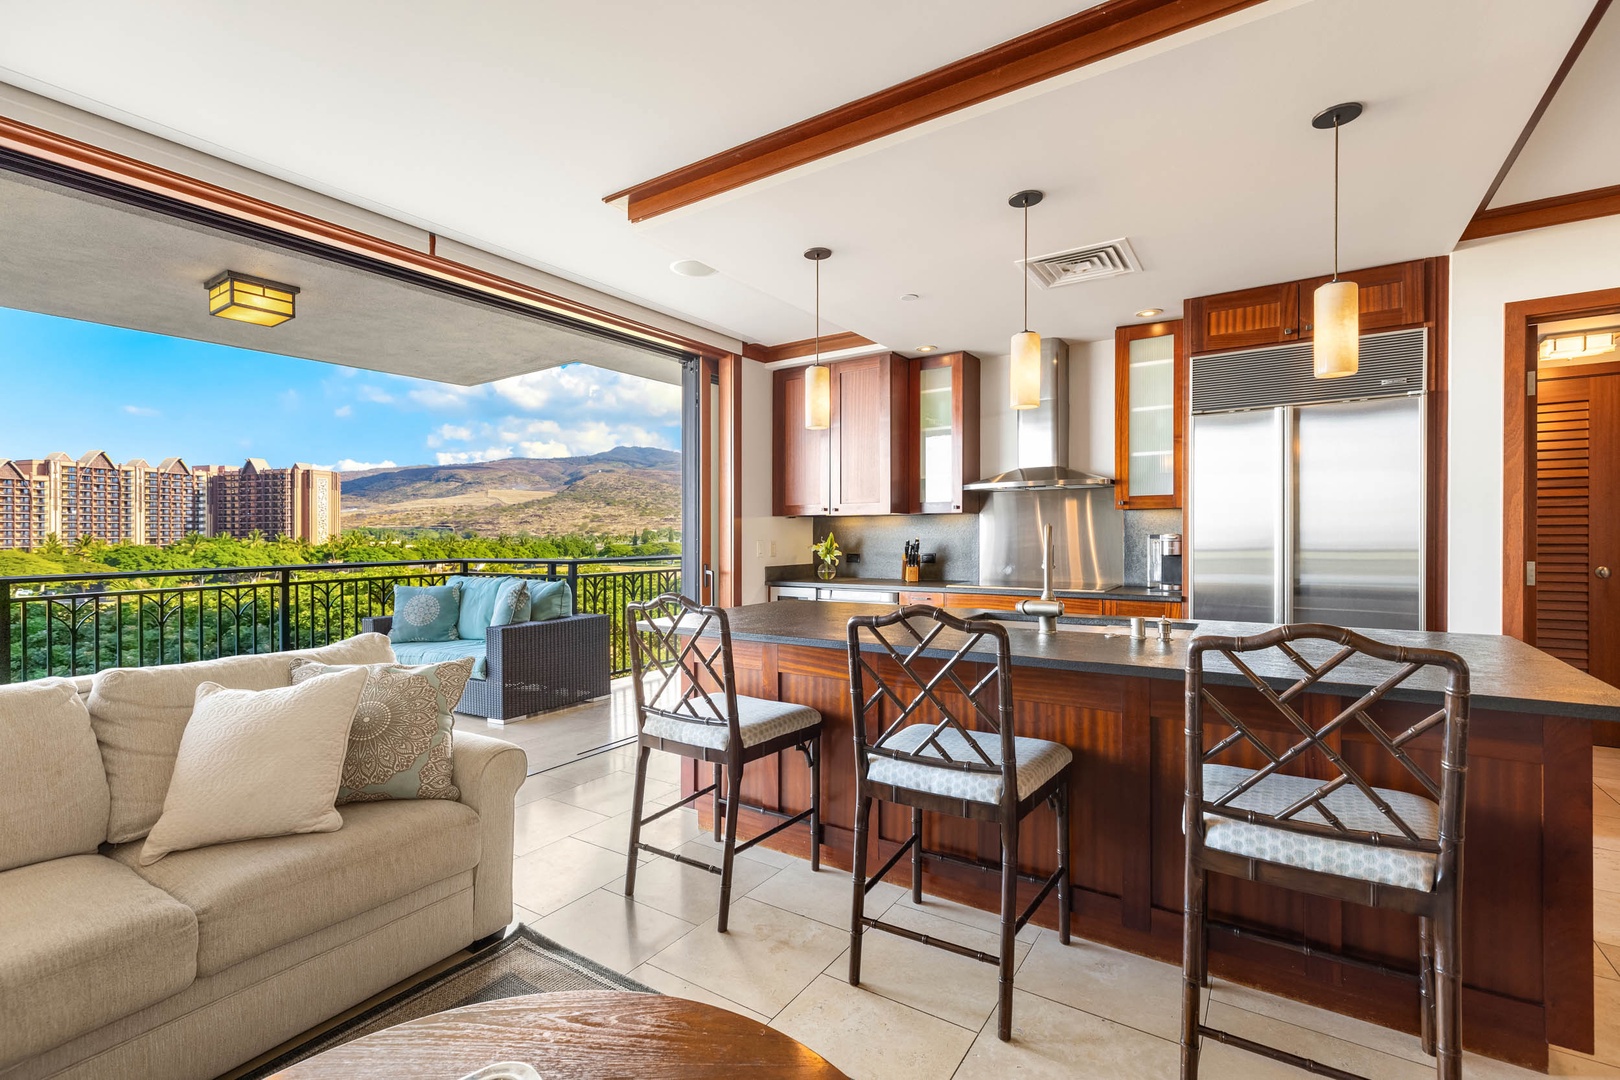 Kapolei Vacation Rentals, Ko Olina Beach Villa B604 - Whip up gourmet meals in this well-equipped kitchen featuring a spacious island bar.